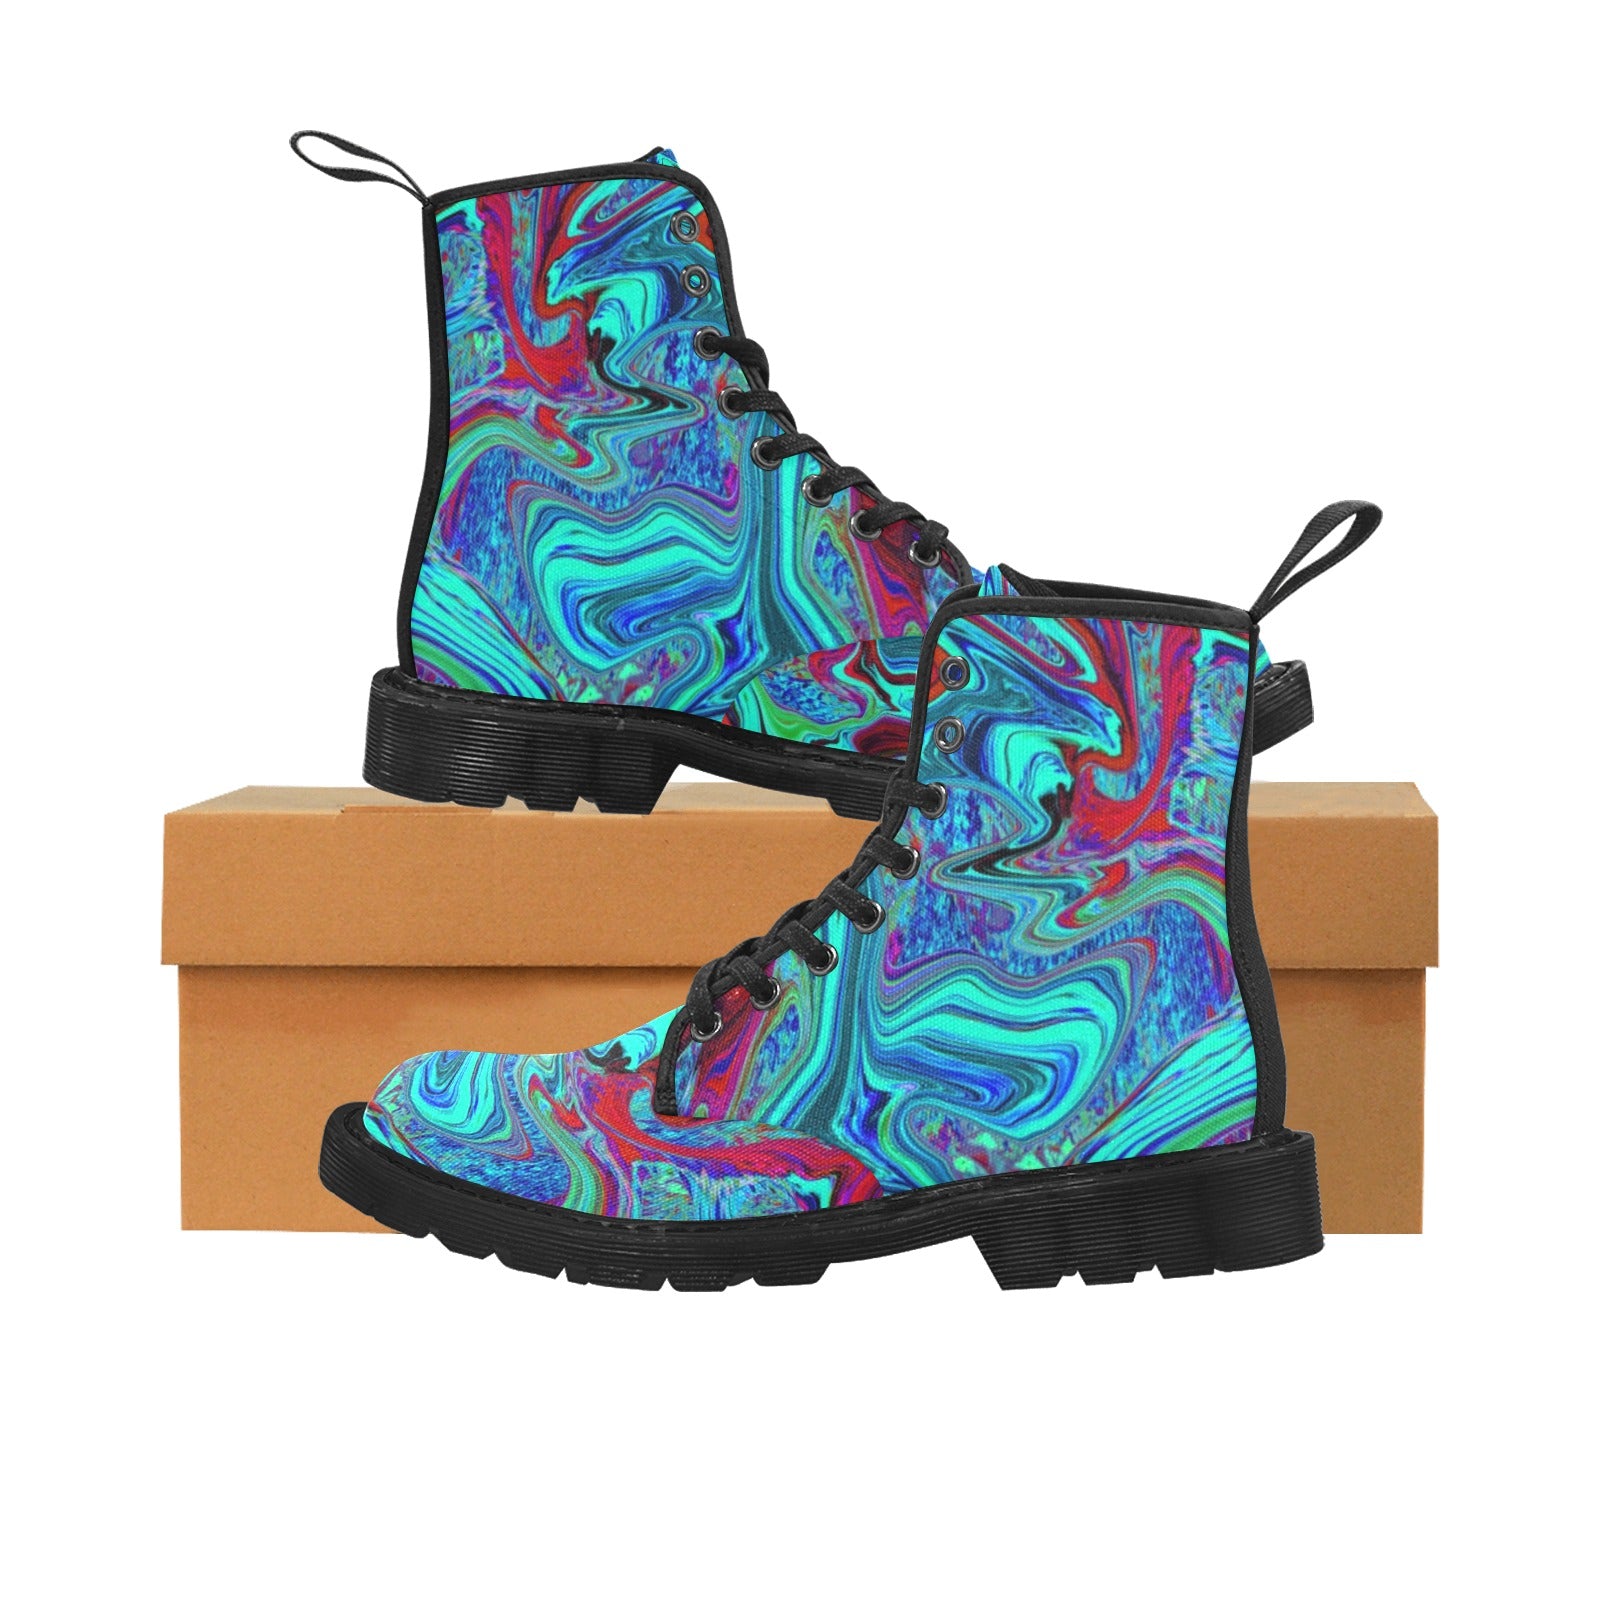 Boots for Women, Groovy Abstract Retro Art in Blue and Red - Black